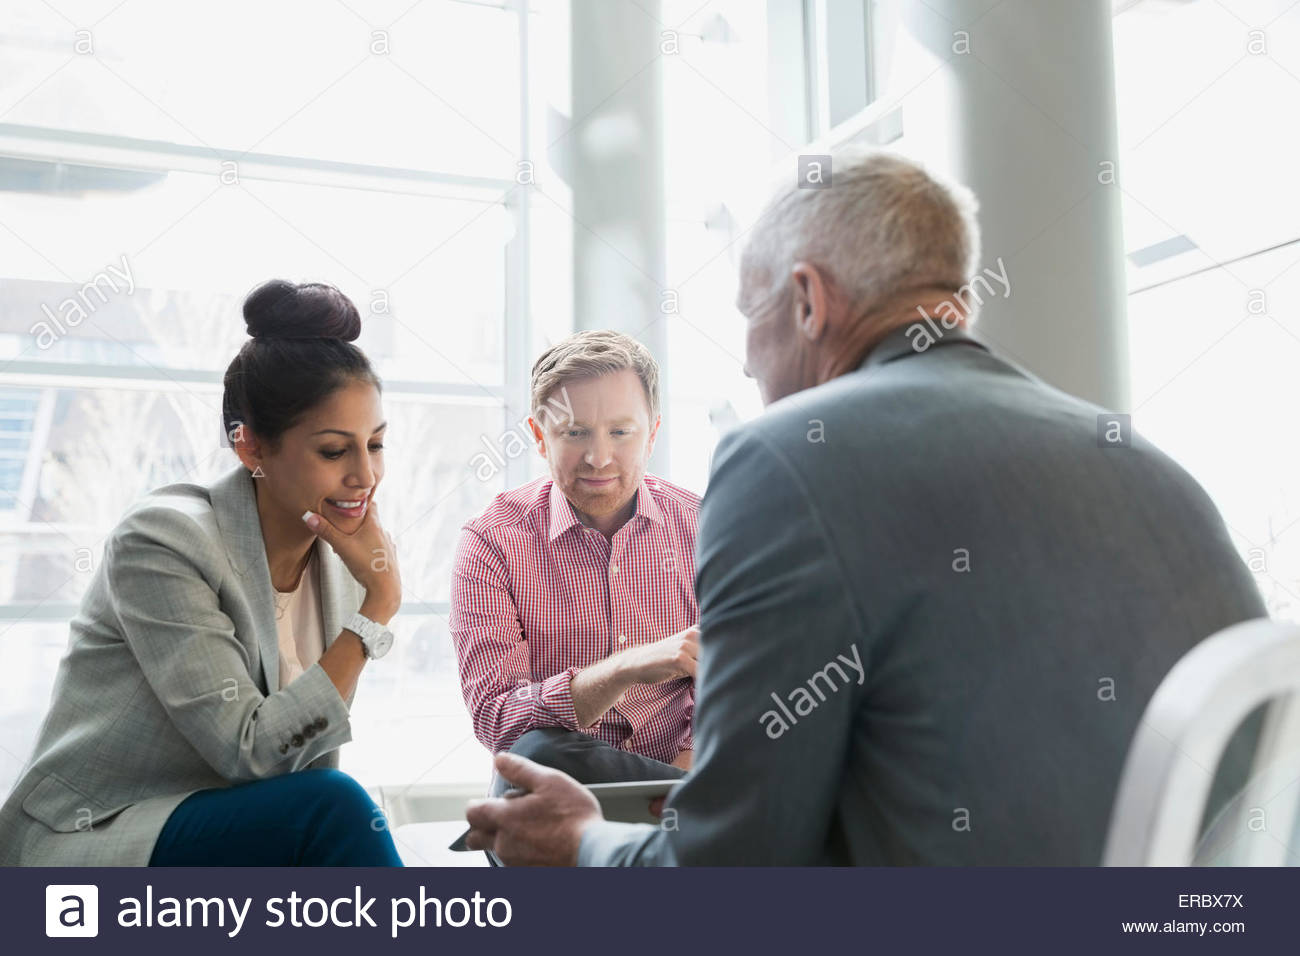 Business people using digital tablet in lobby Stock Photo